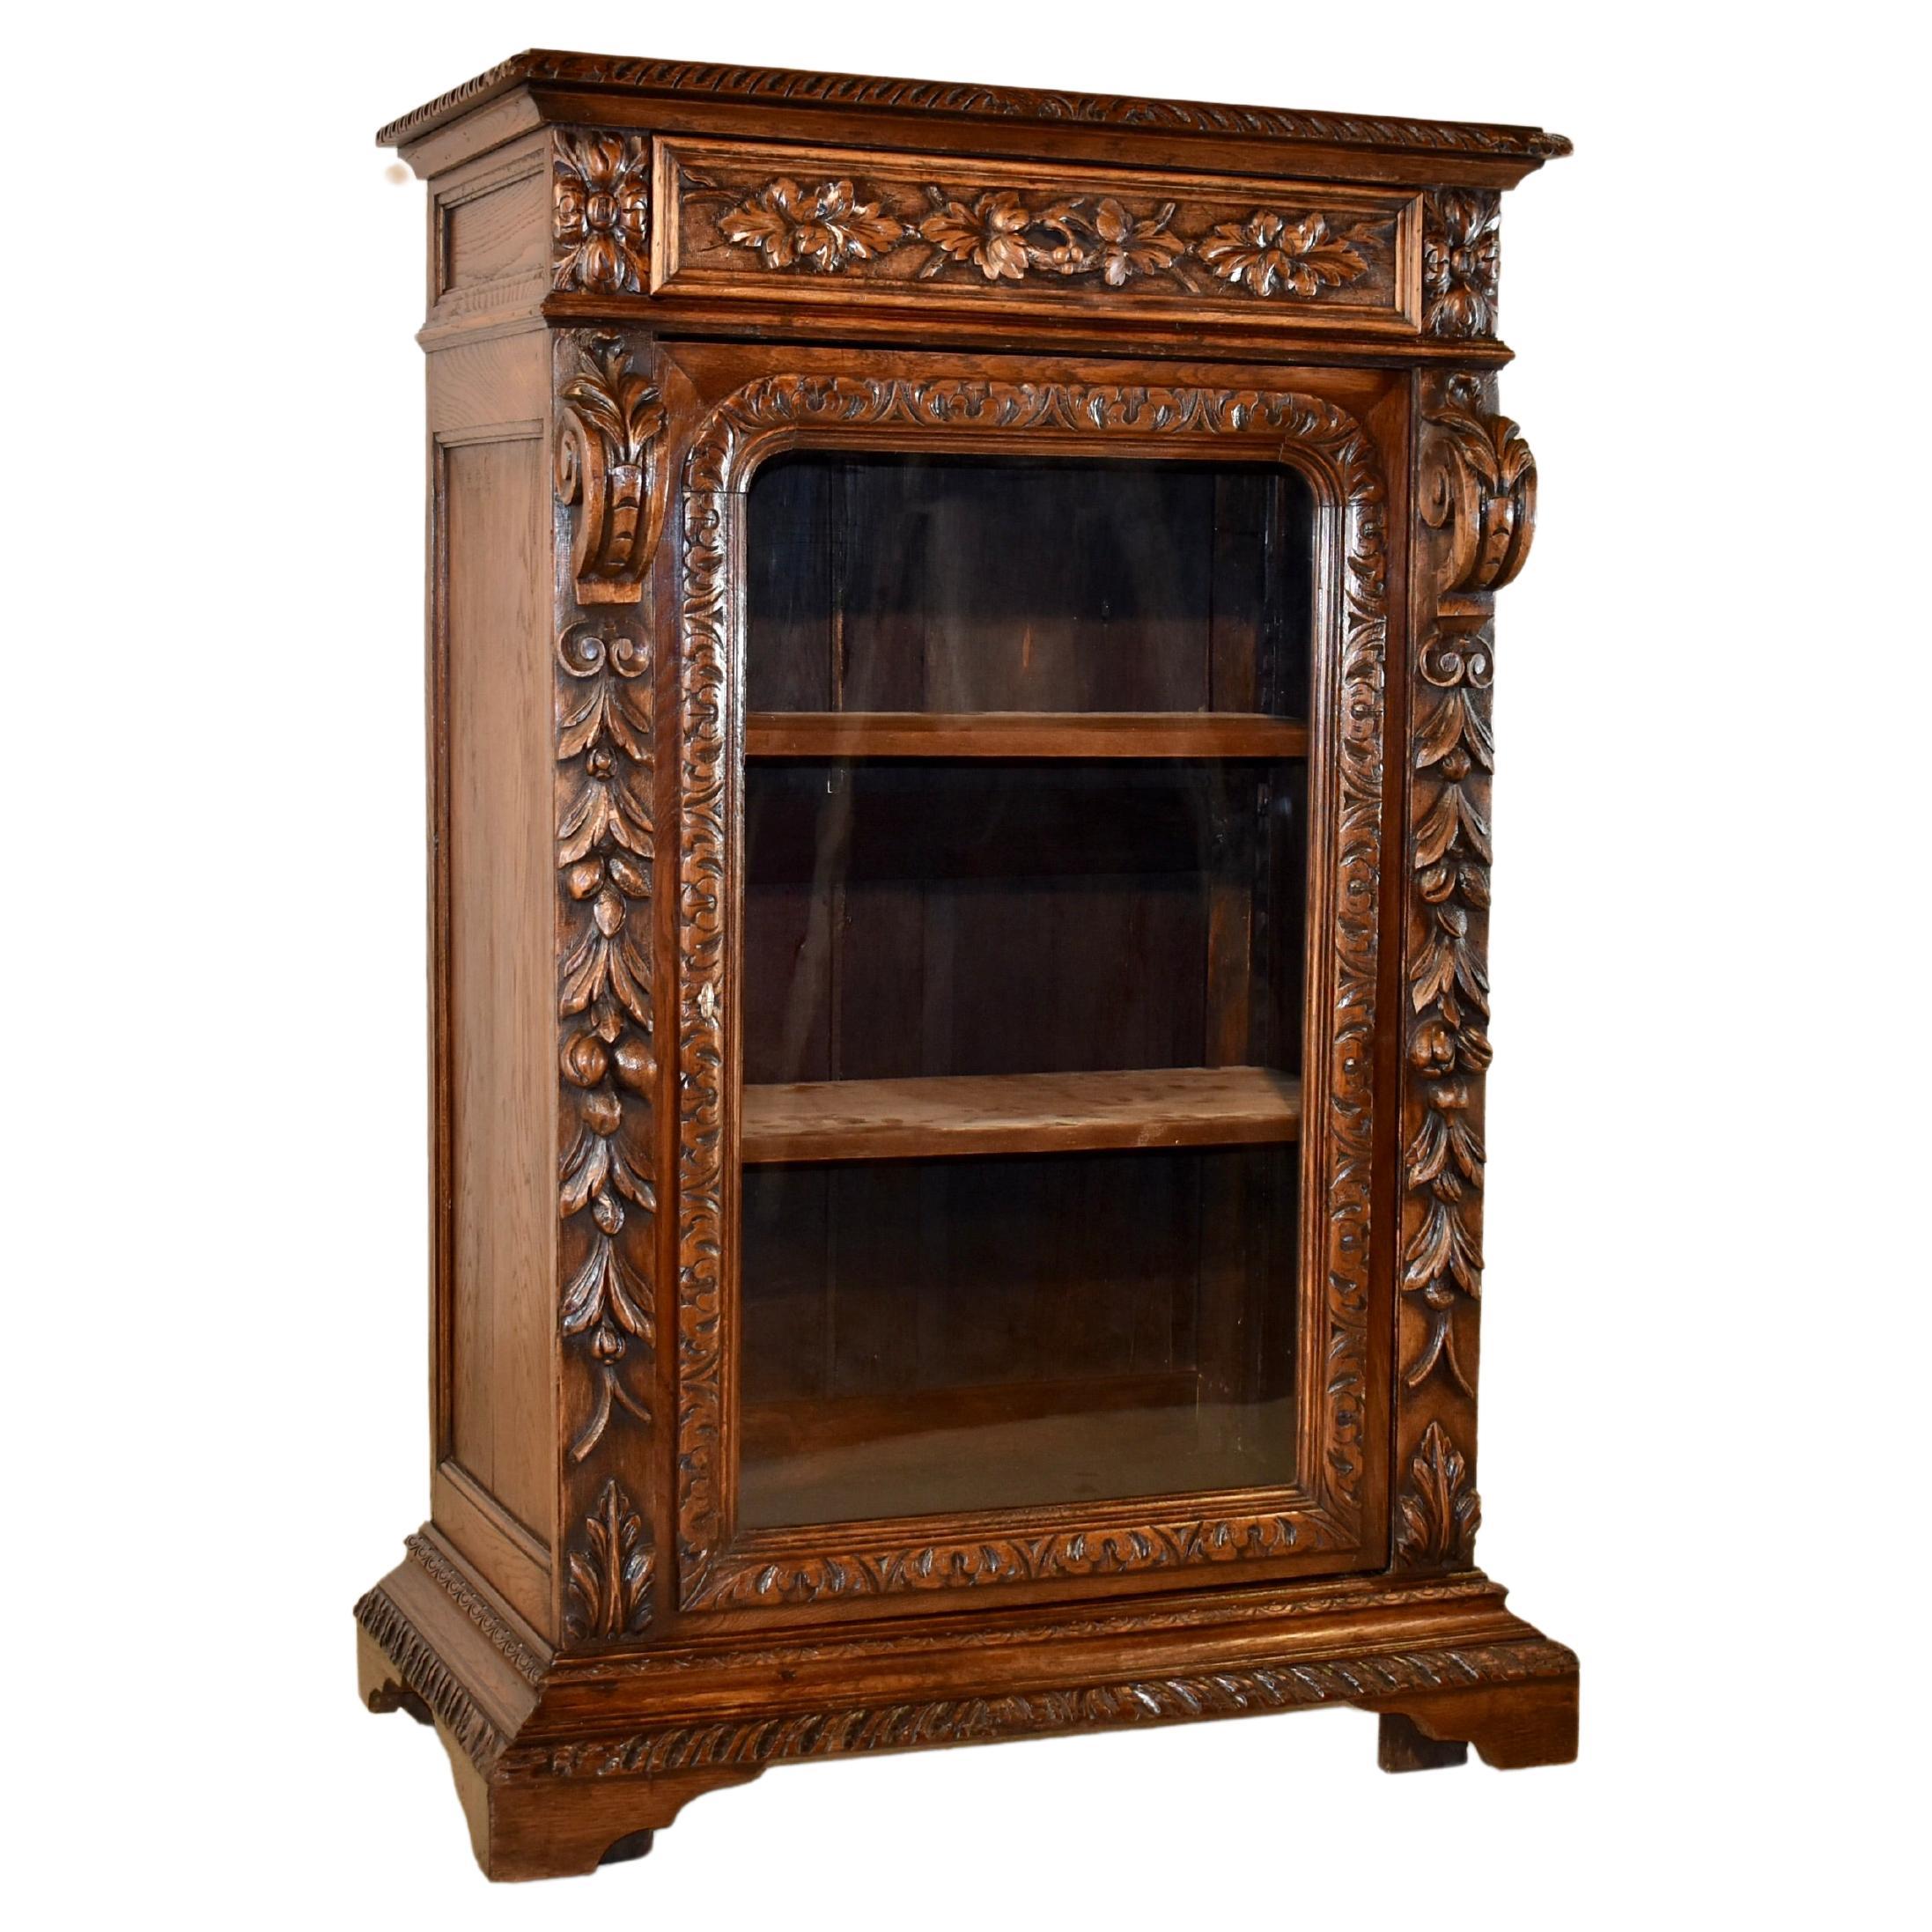 19th Century French Carved Bookcase